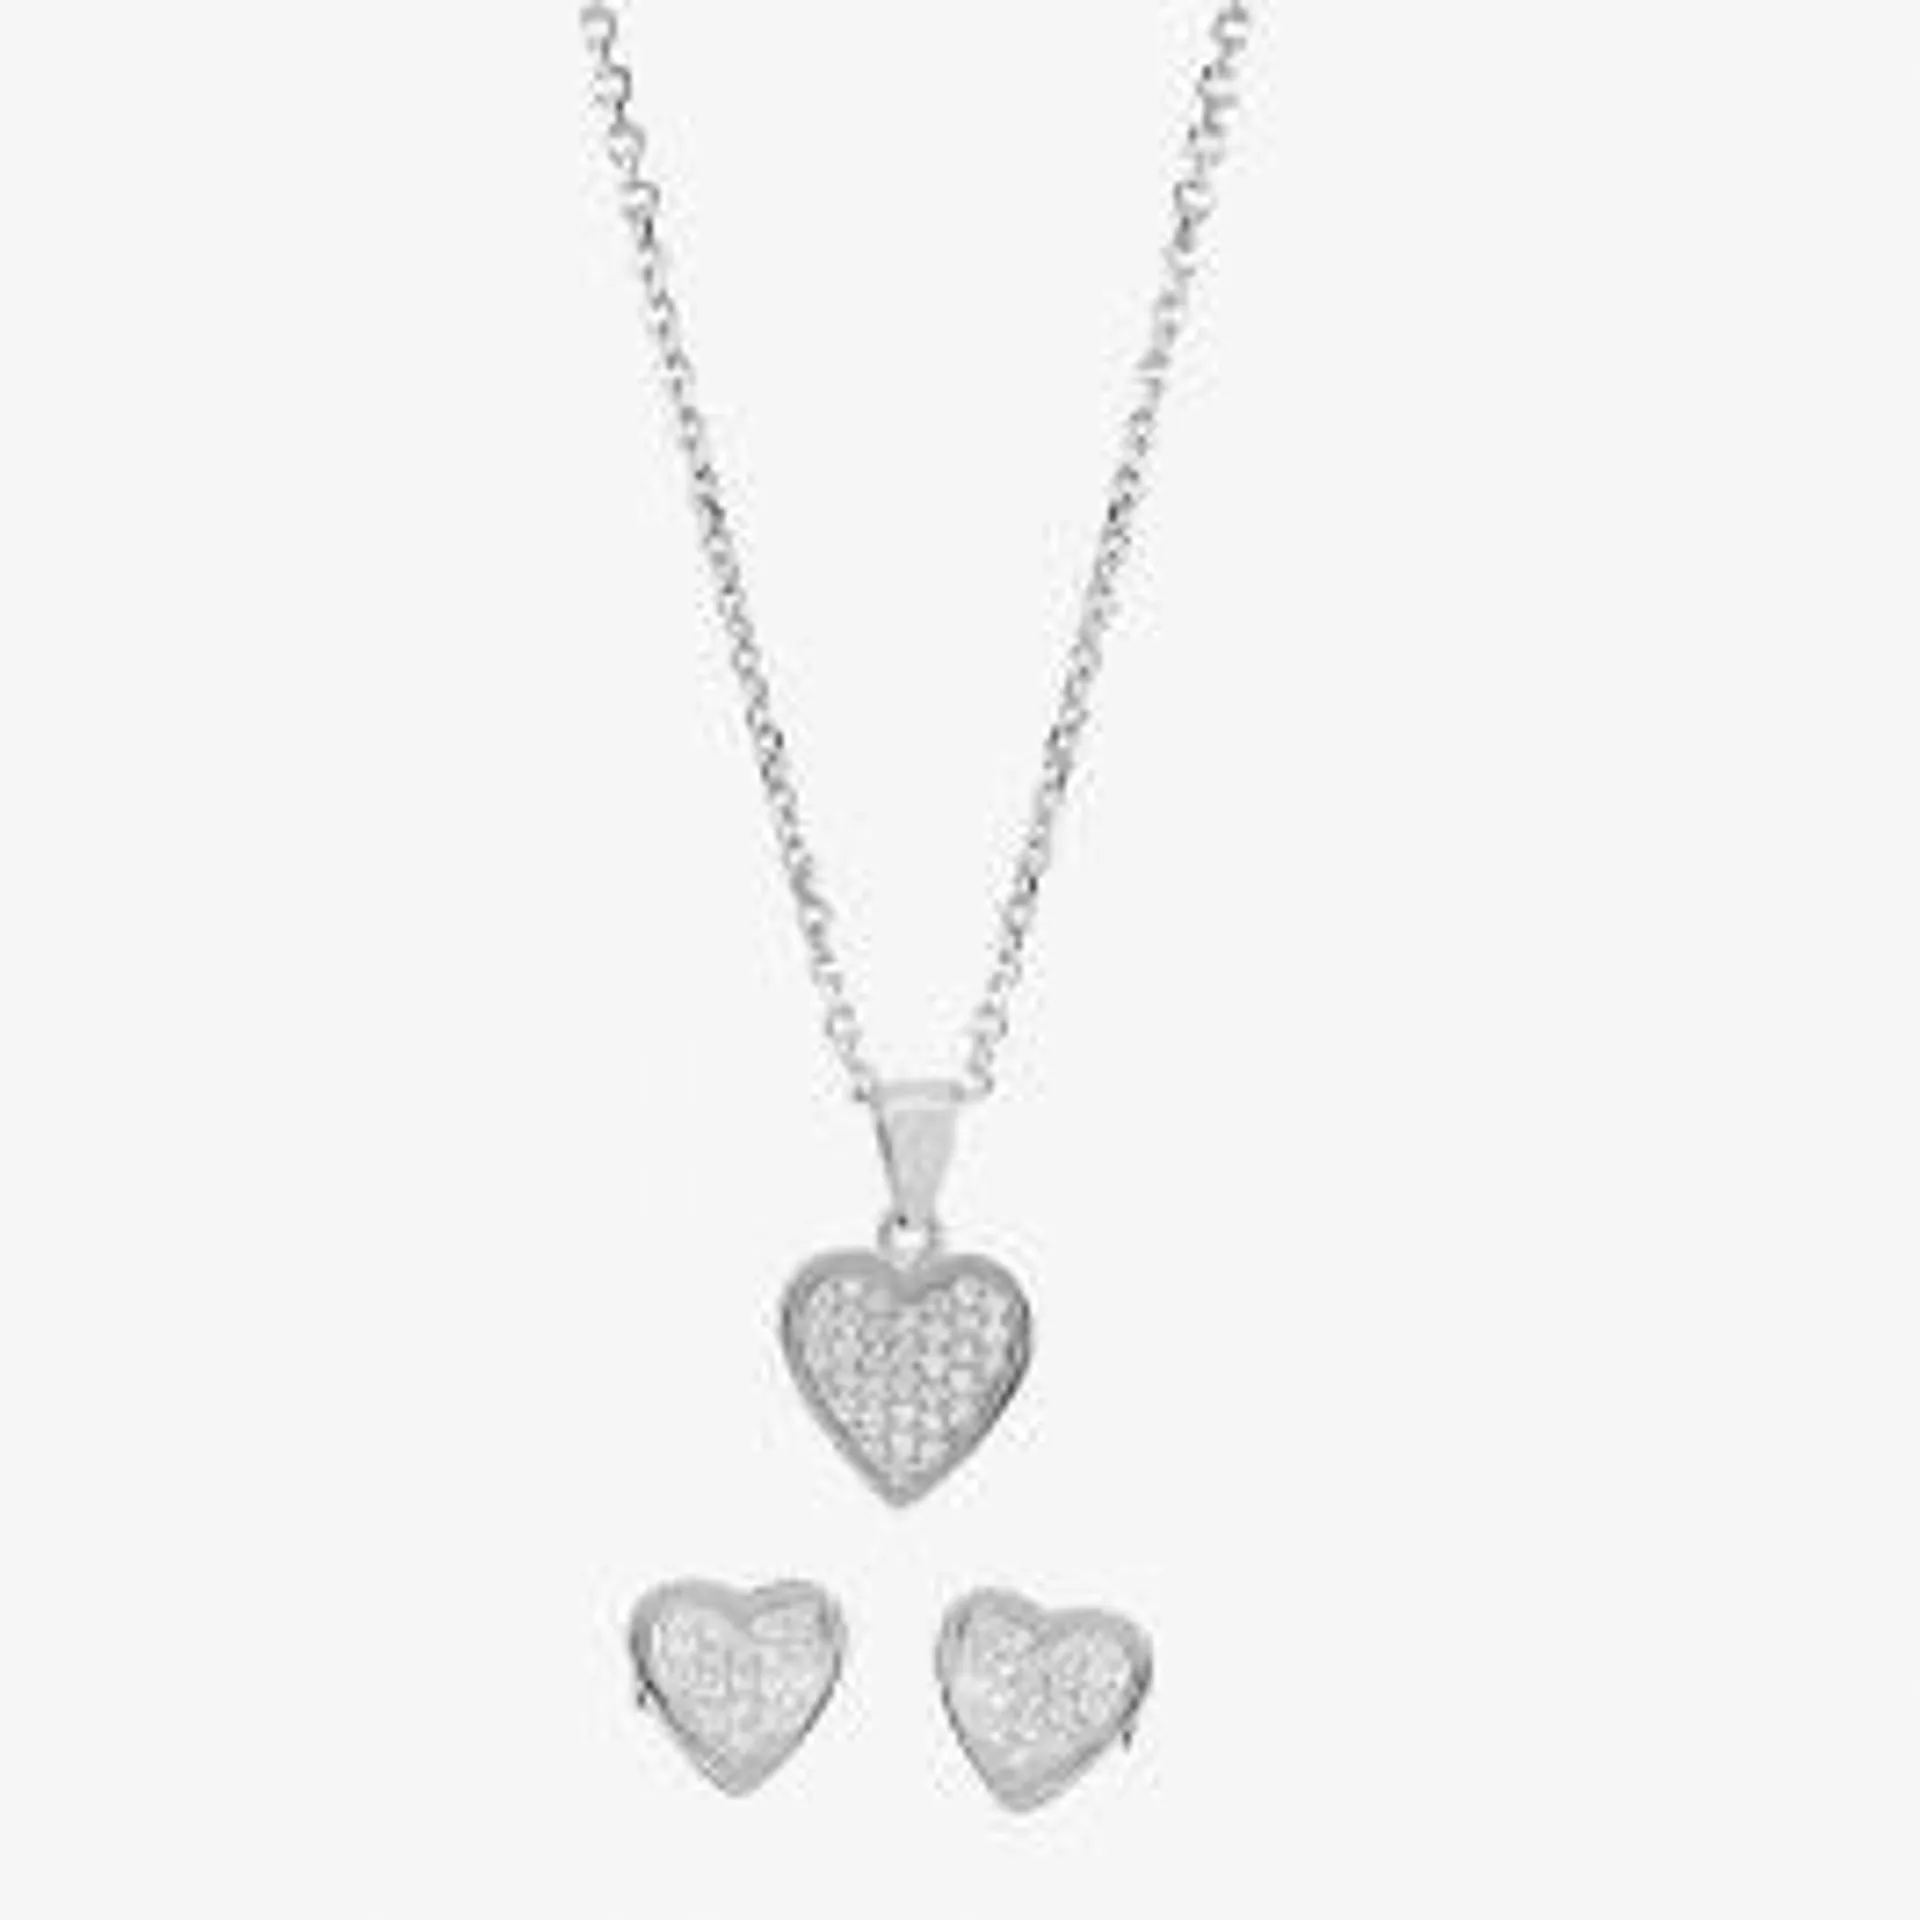 Silver Pave Heart Pendant and Earring Set SET7305